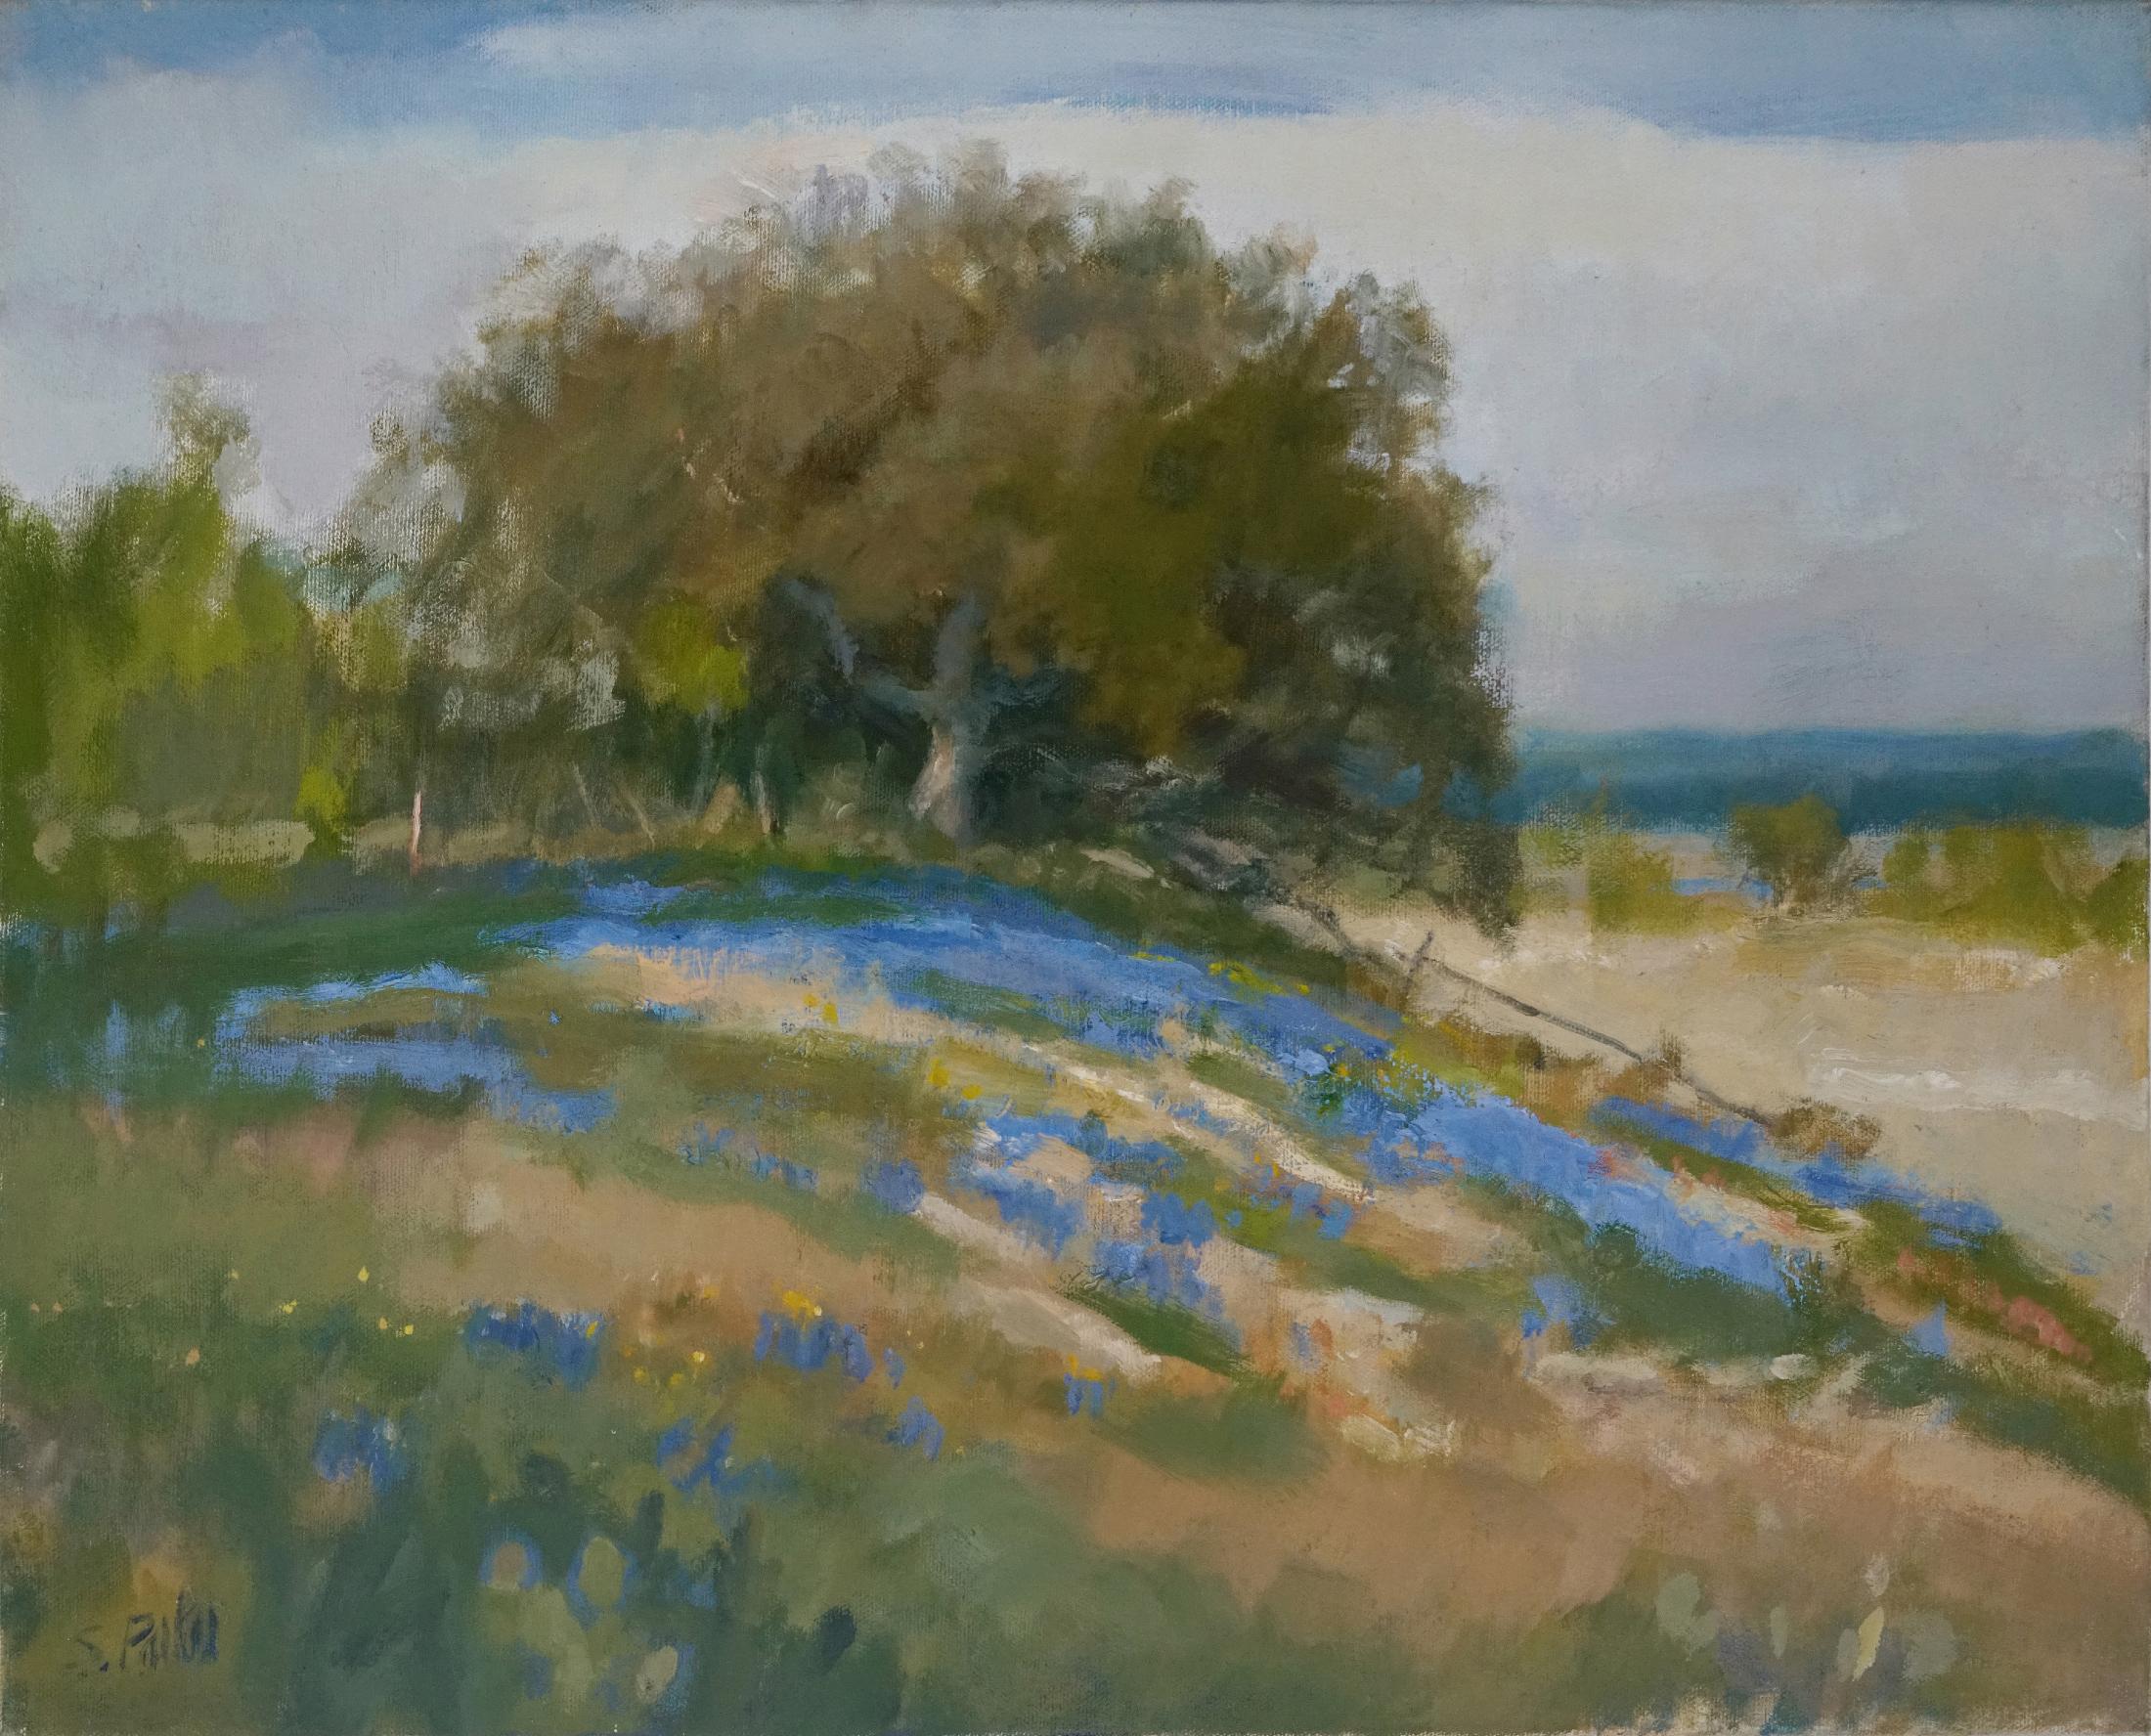 Look for Free Shipping when Checking Out

Weimar Spring is painted from a plein aire study from a day in Weimar, Texas. This was painted in the spring when the bluebonnets beginning  to bloom. It is common for people to take weekend drives to these